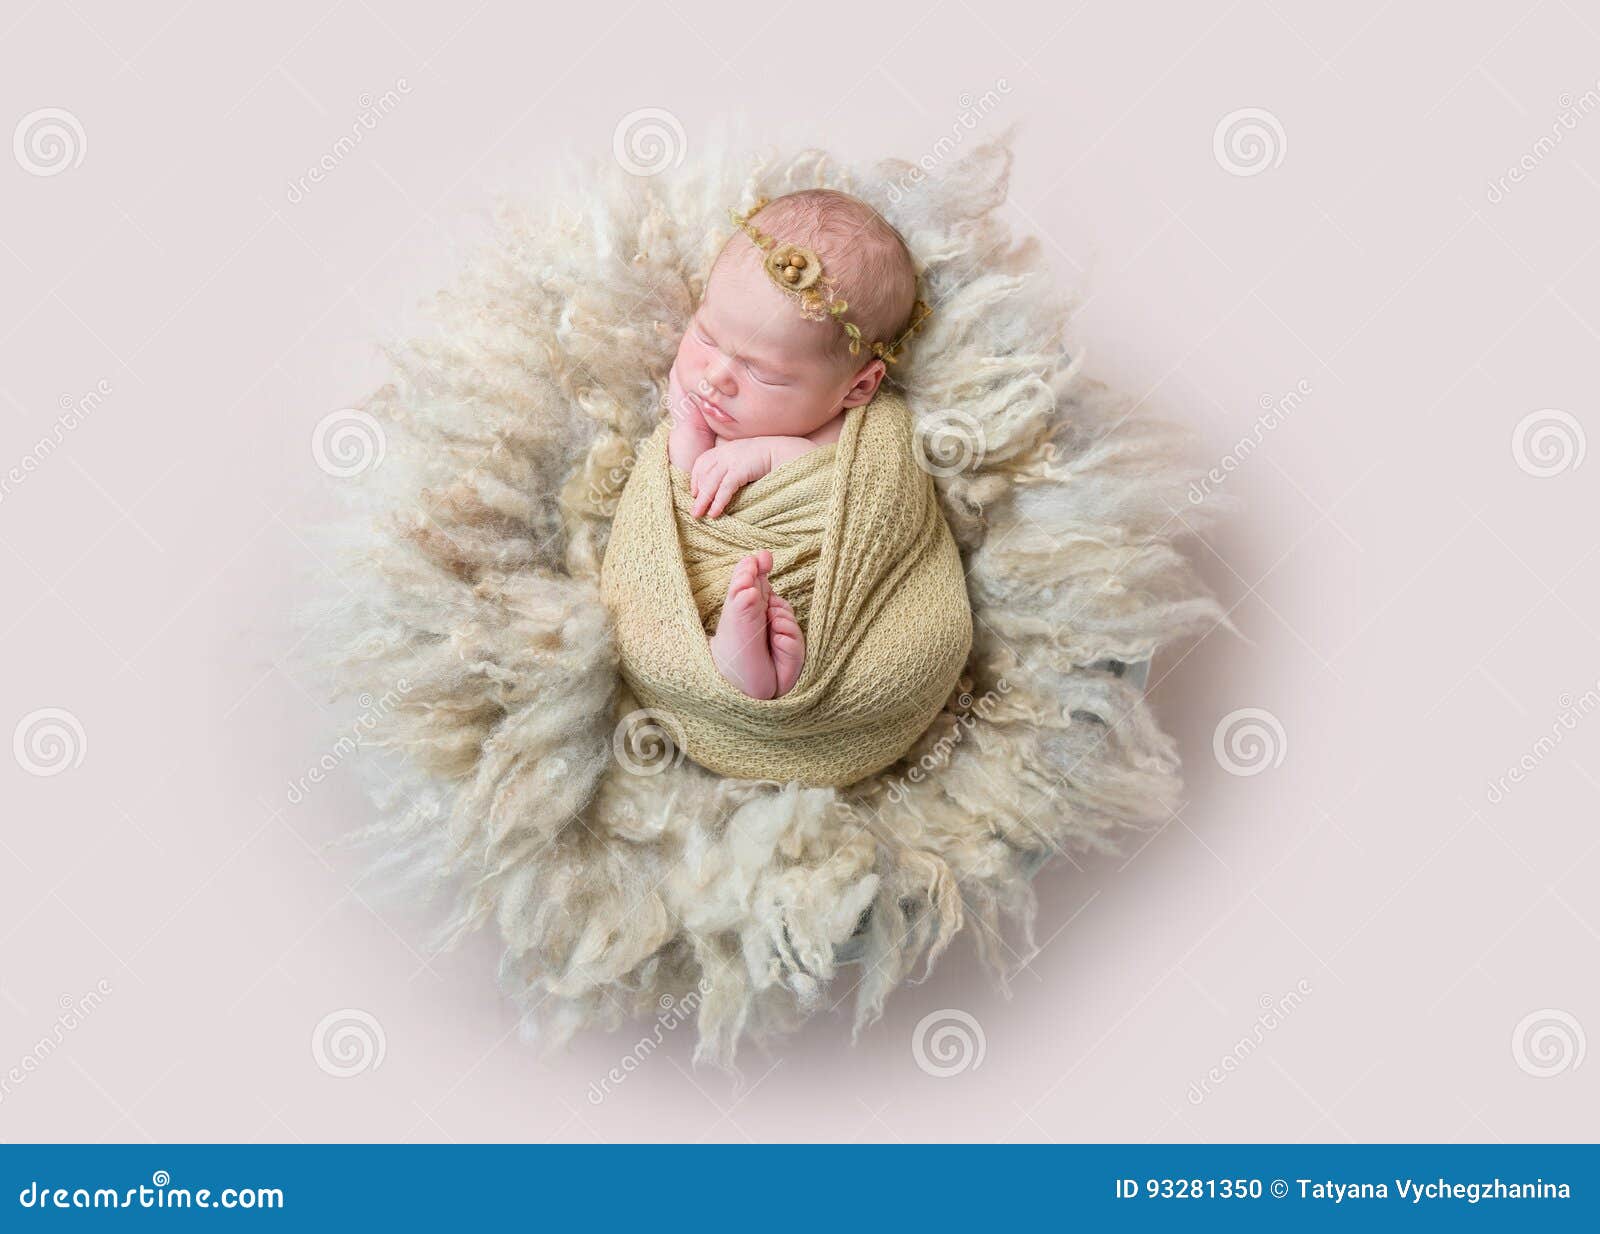 infant sleeping swaddled with rabbit toy, topview